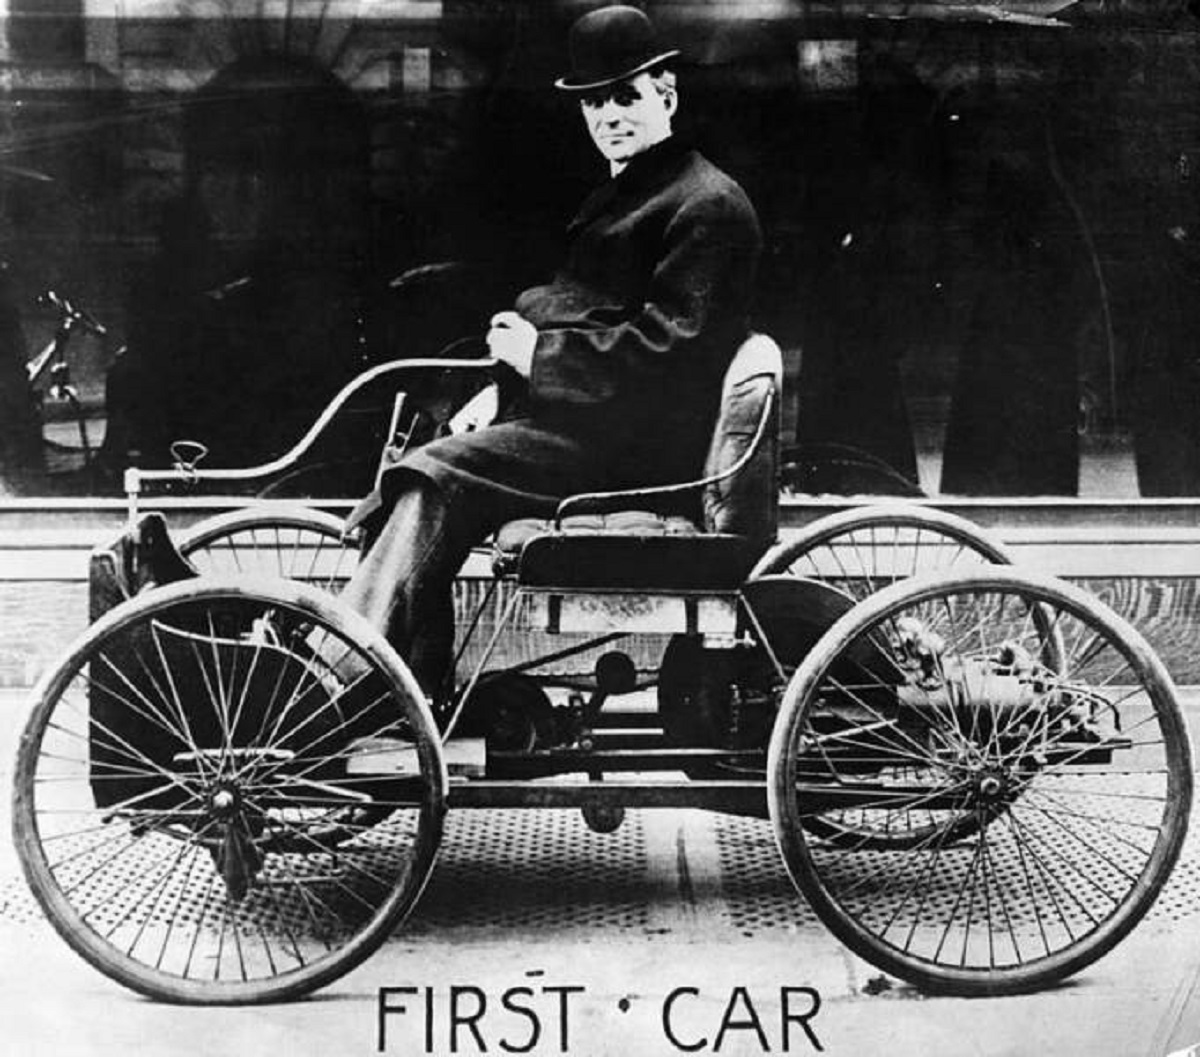 This is Henry Ford cruising around in the first car he designed, the Quadricycle: